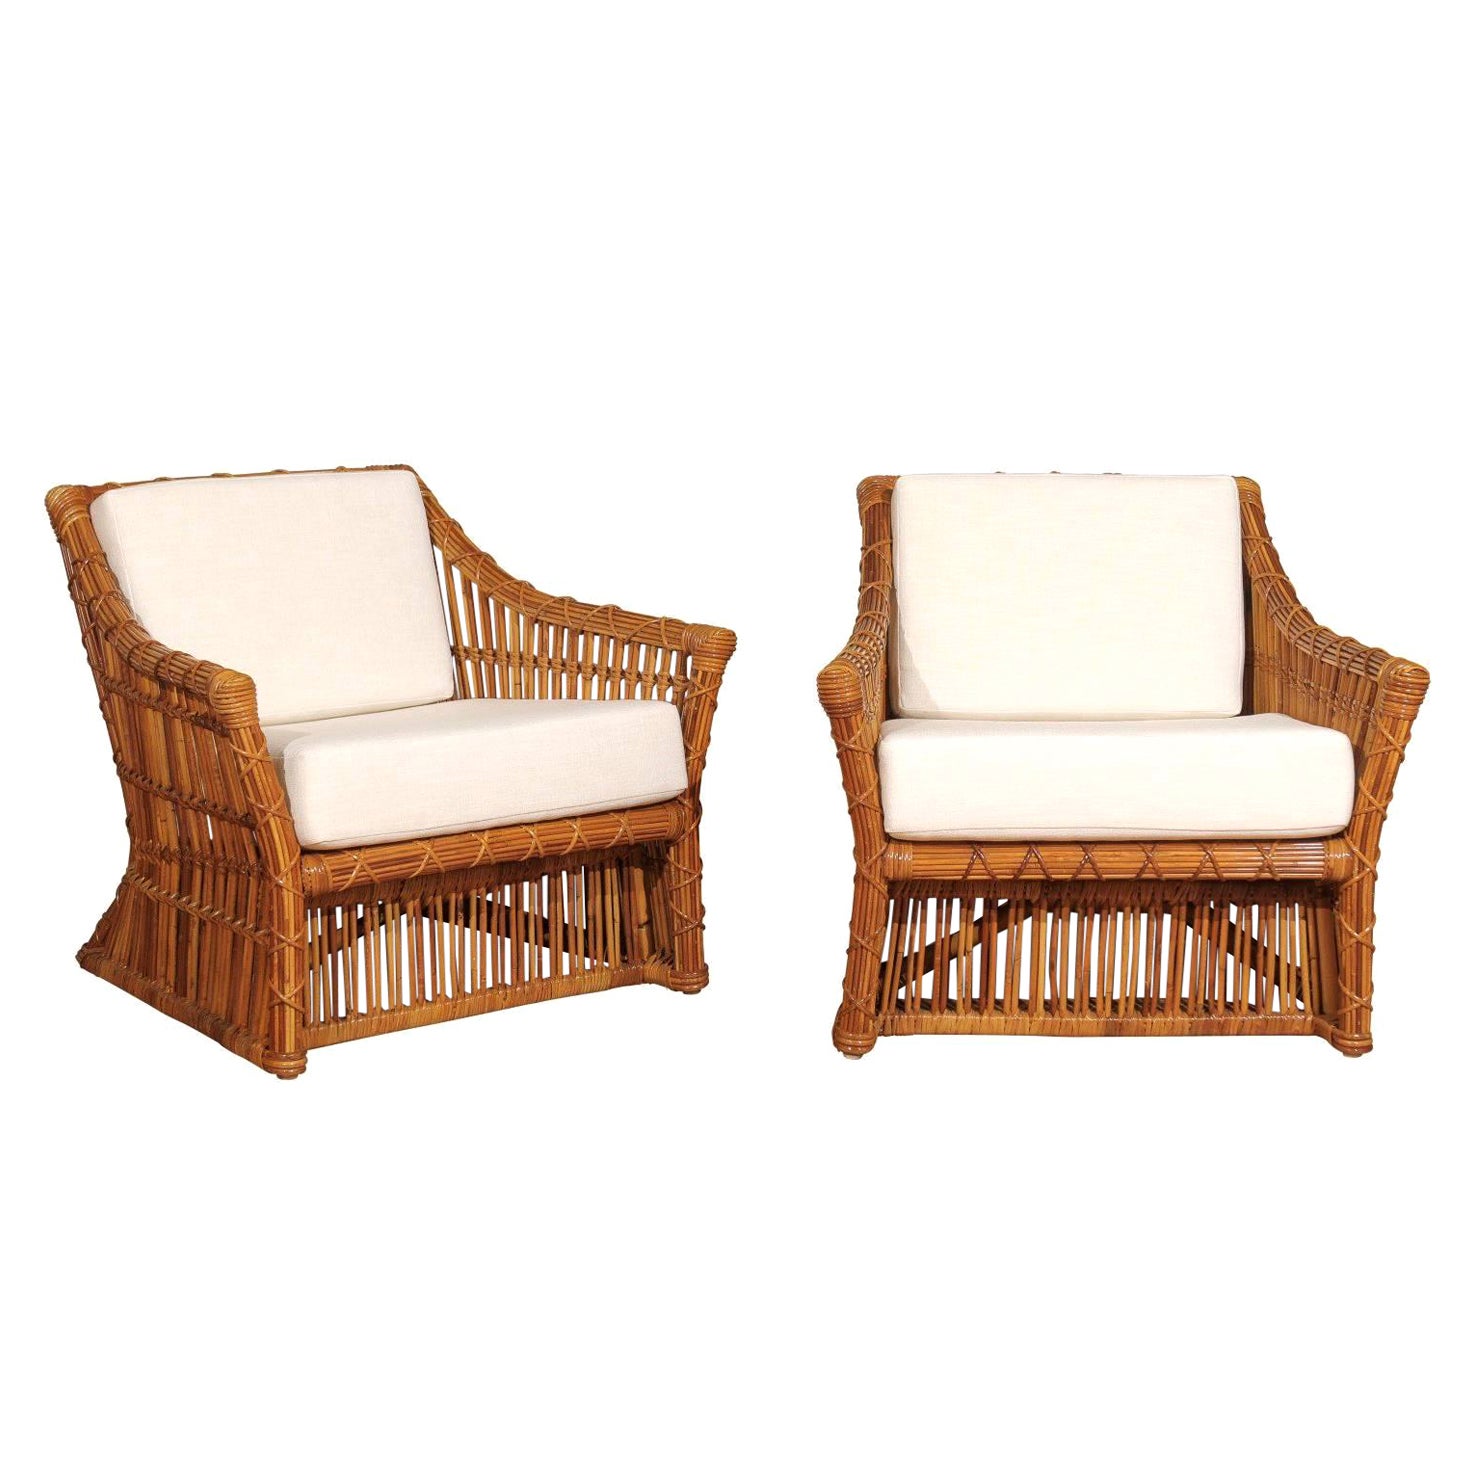 Magnificent Pair of Restored Vintage Rattan Club Chairs by McGuire For Sale